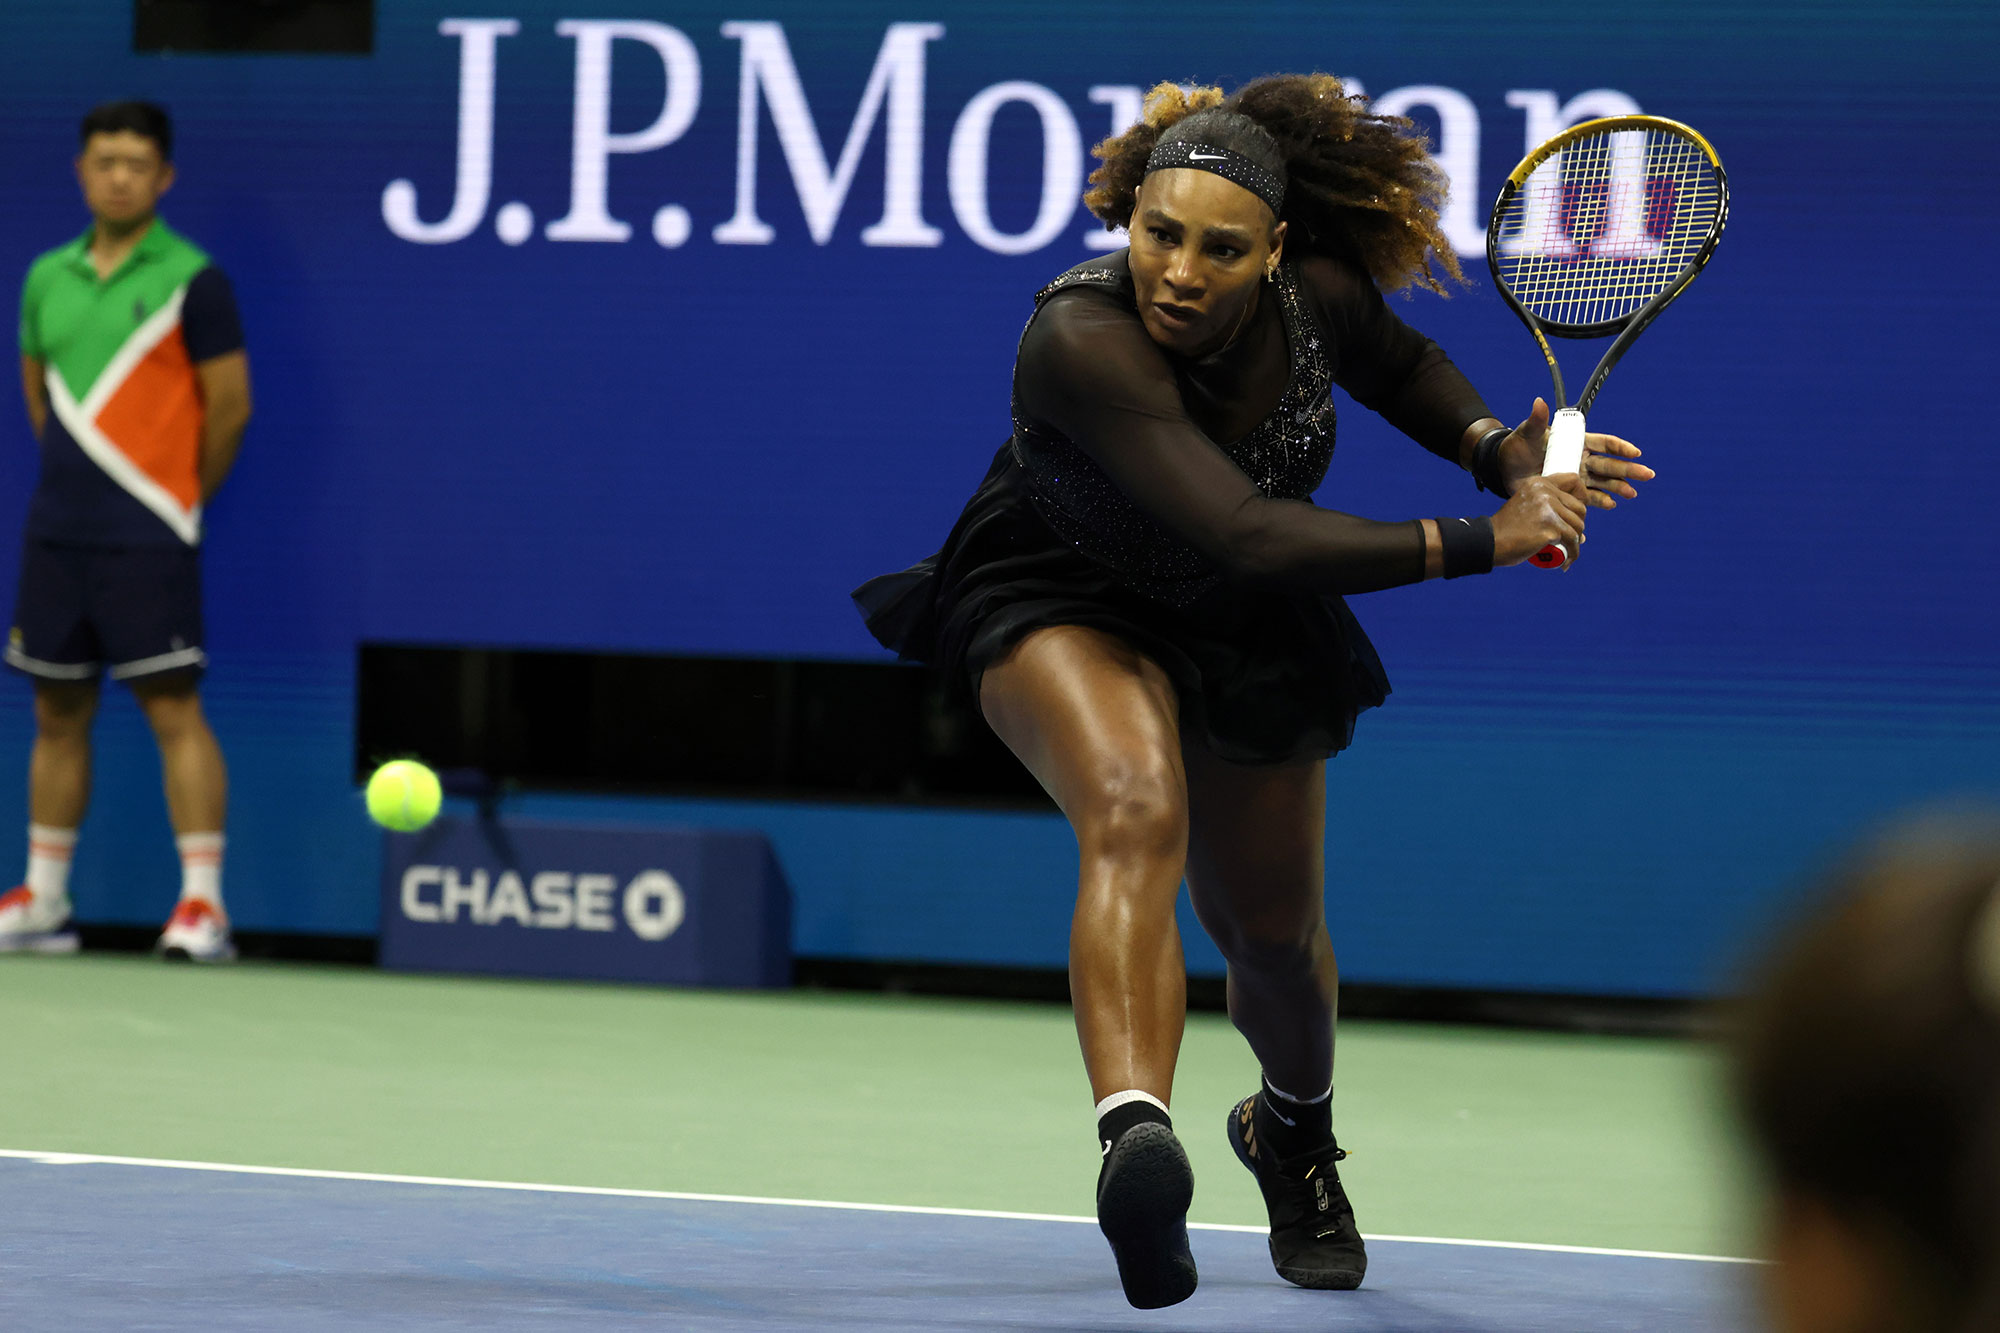 Serena Williams beats World No. 2 in Round 2 at US Open